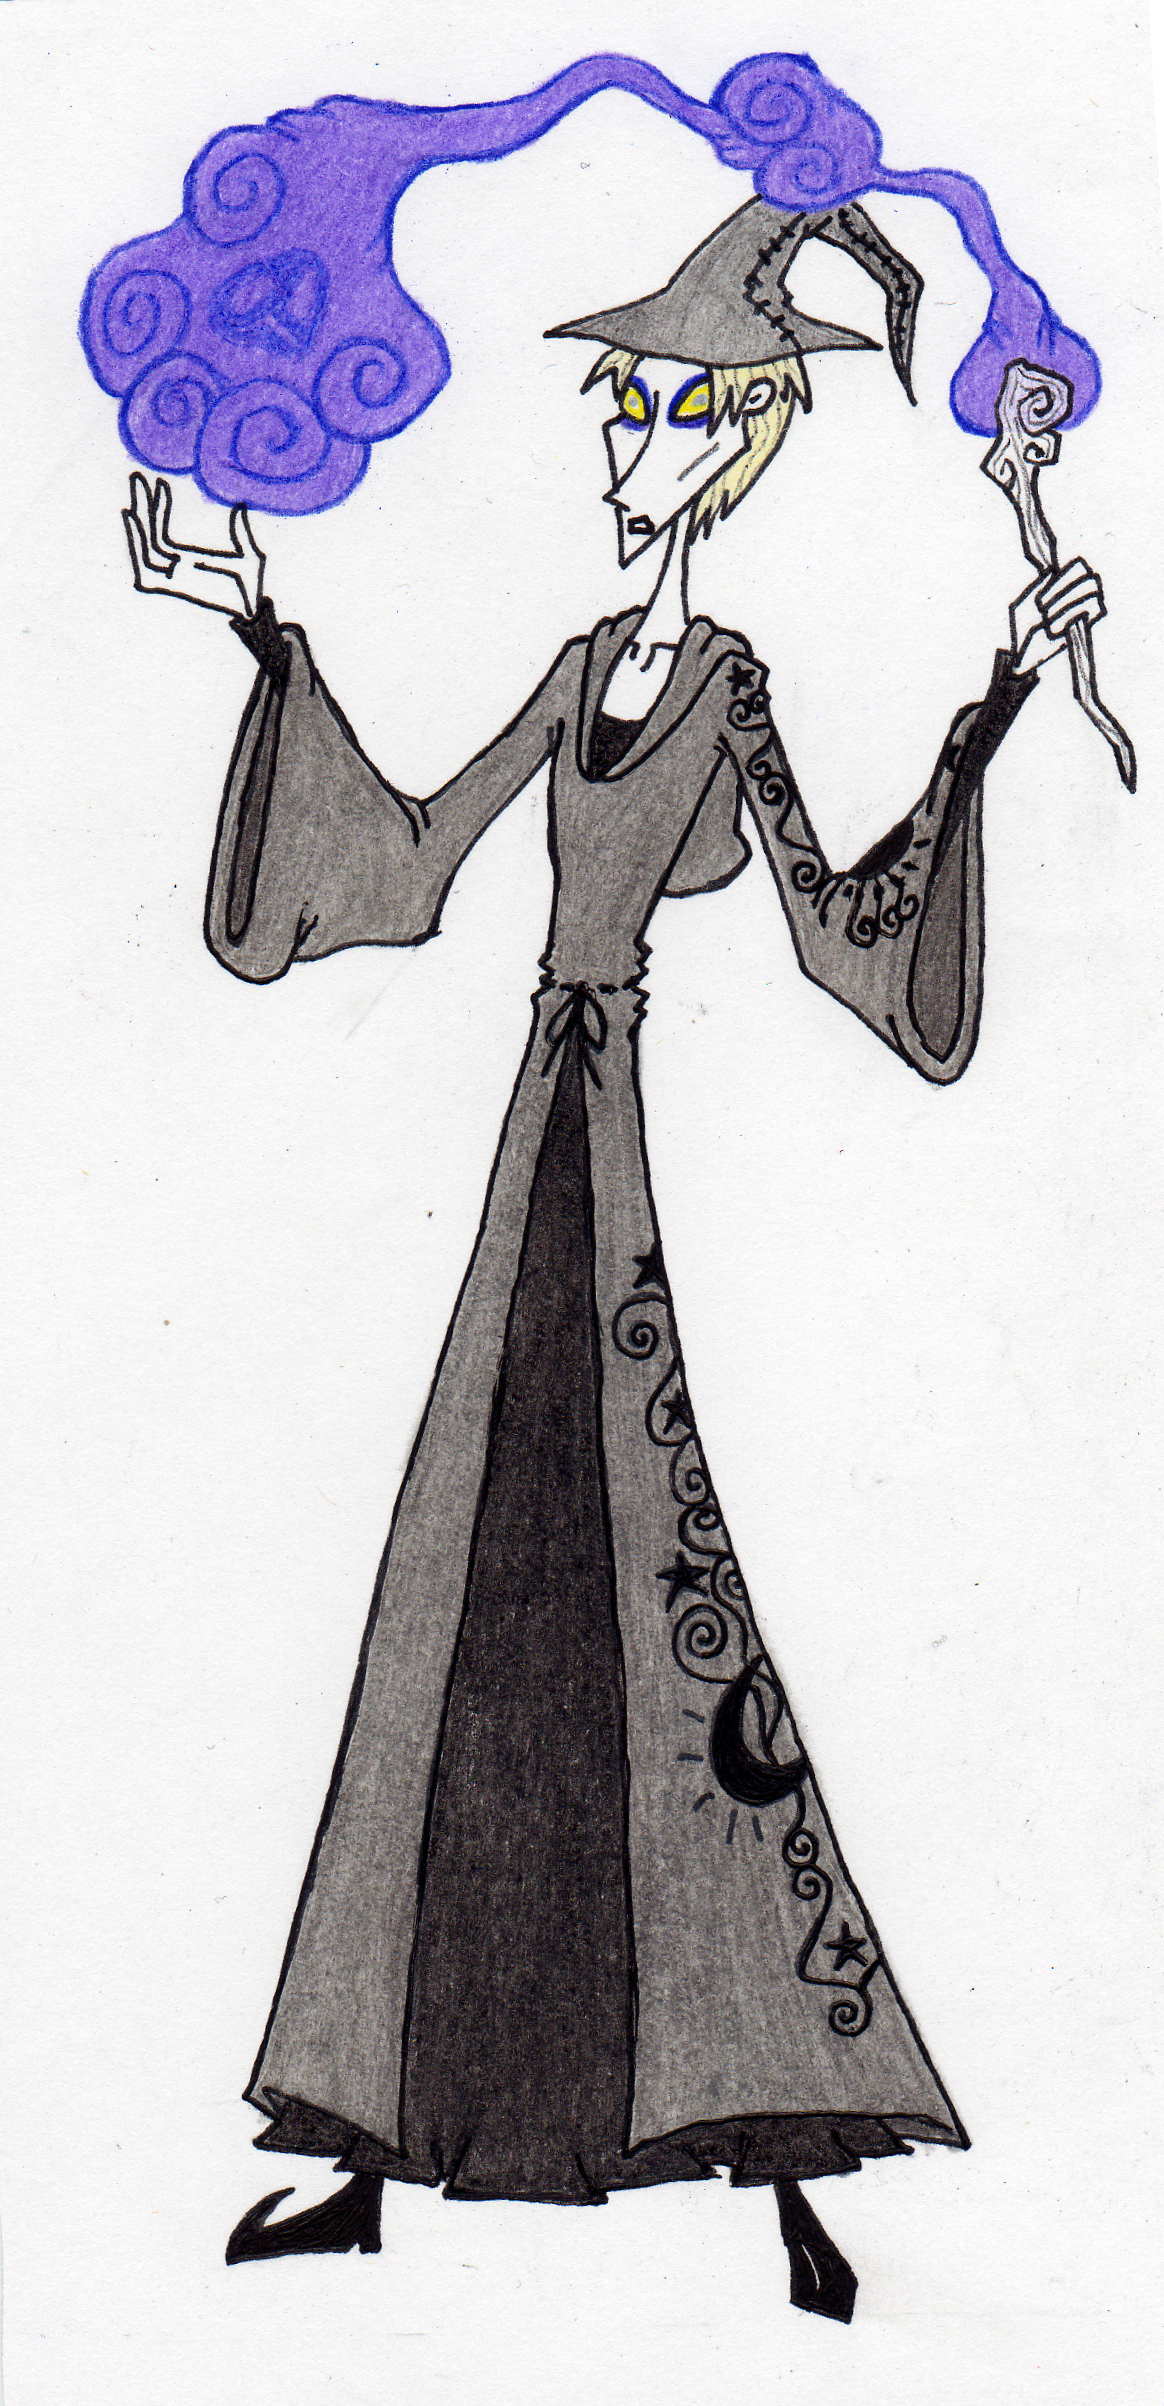 Hatchet in traditional Cloak by pooterda